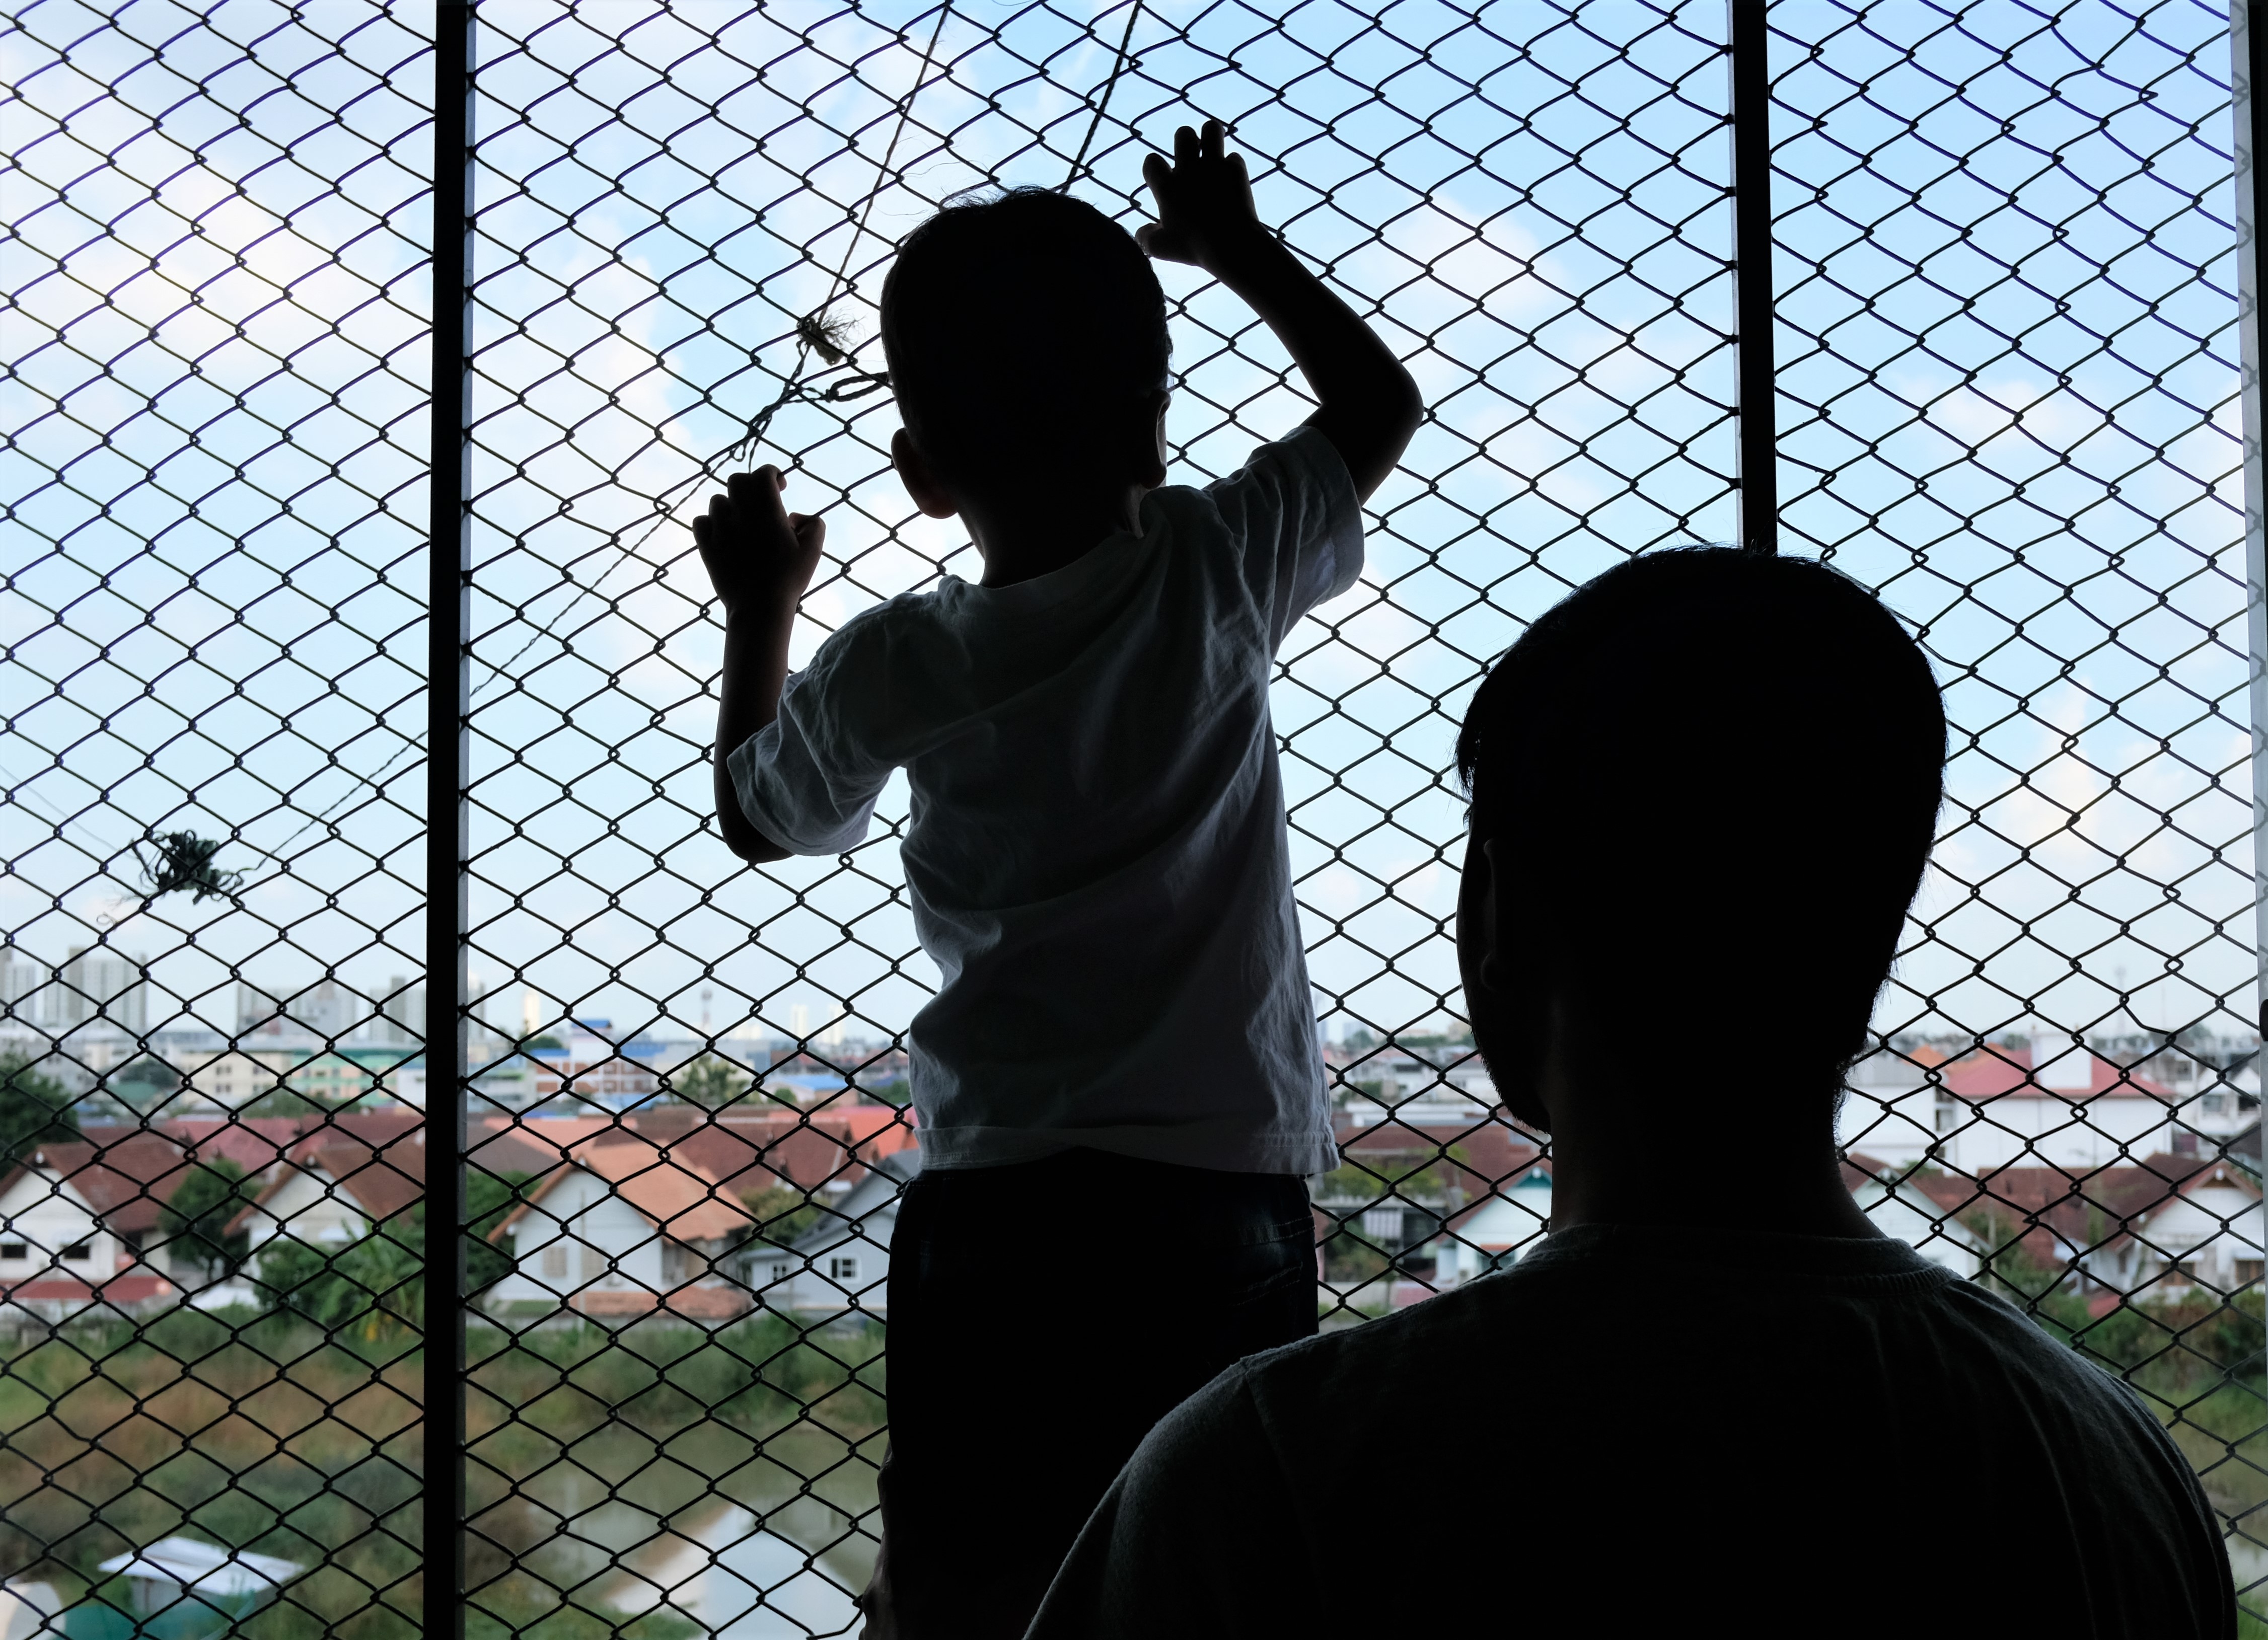 Shazee, a four-year-old stateless boy, gazes through wire-mesh netting in the corridor of a low-rent apartment building in Bangkok, alongside his father, Shan, a Christian asylum seeker from Lahore, Pakistan. Photo: Tibor Krausz